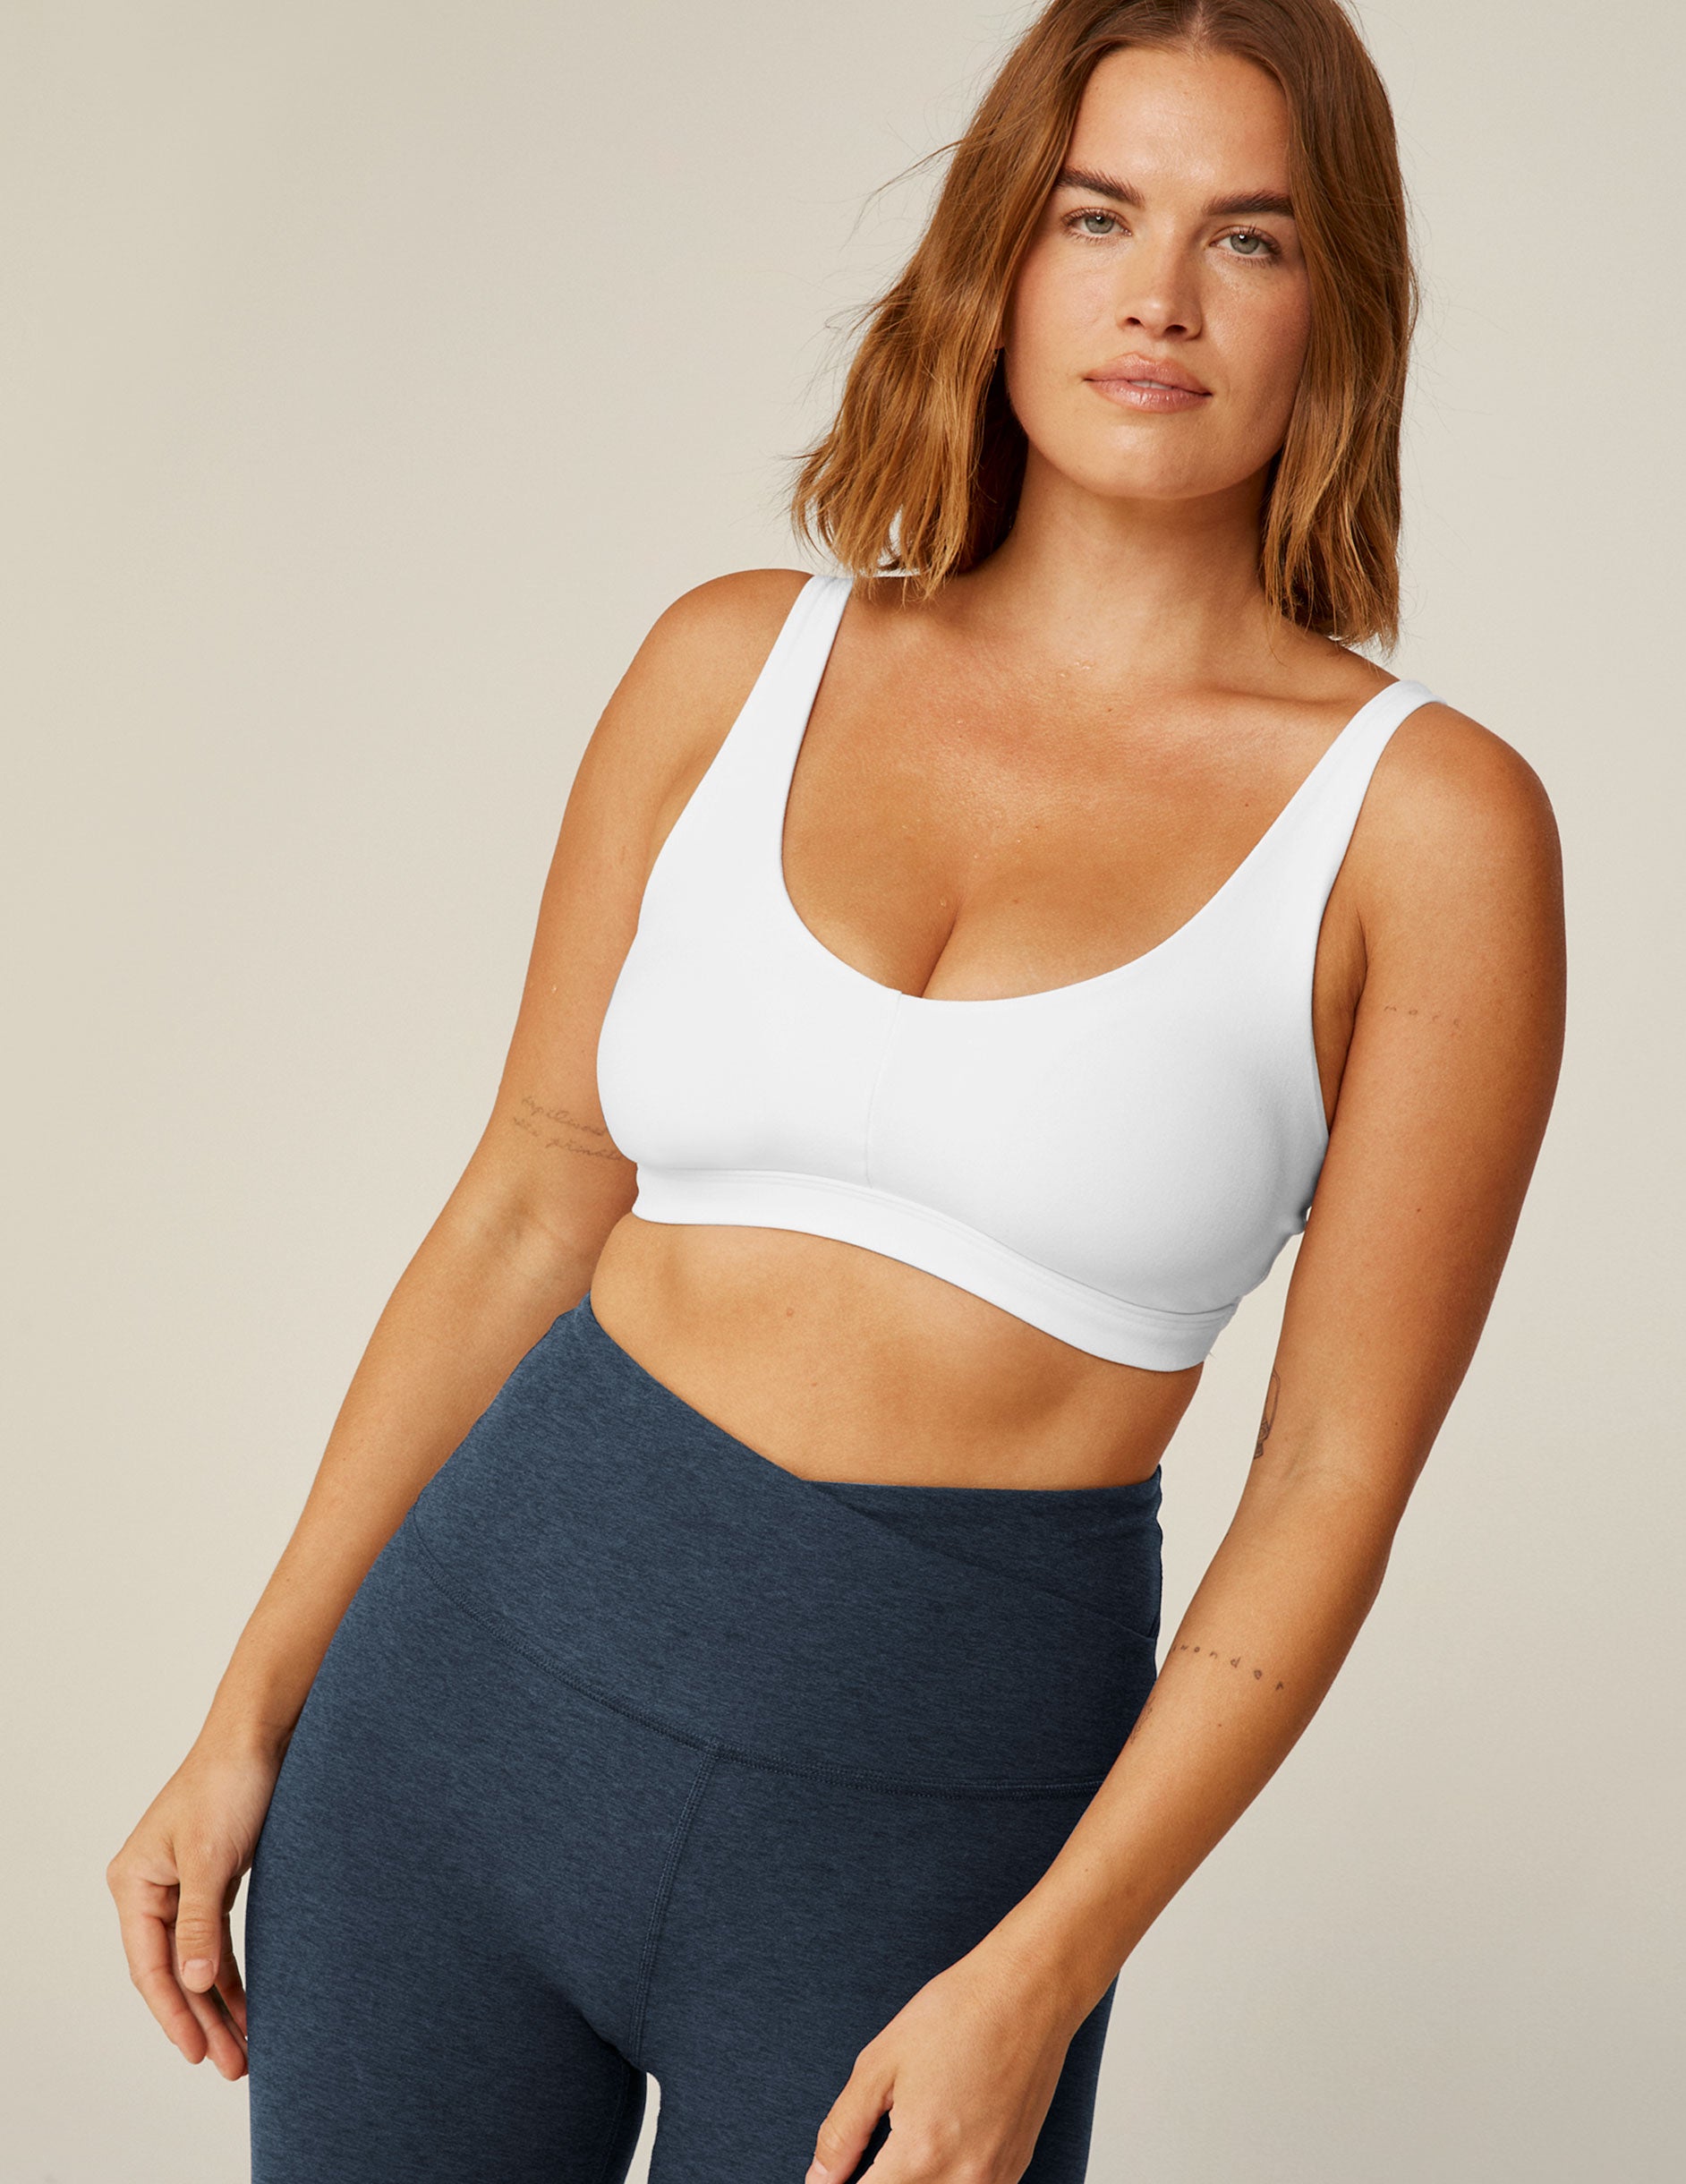 white v-neck bra top with removeable pads and adjustable straps.